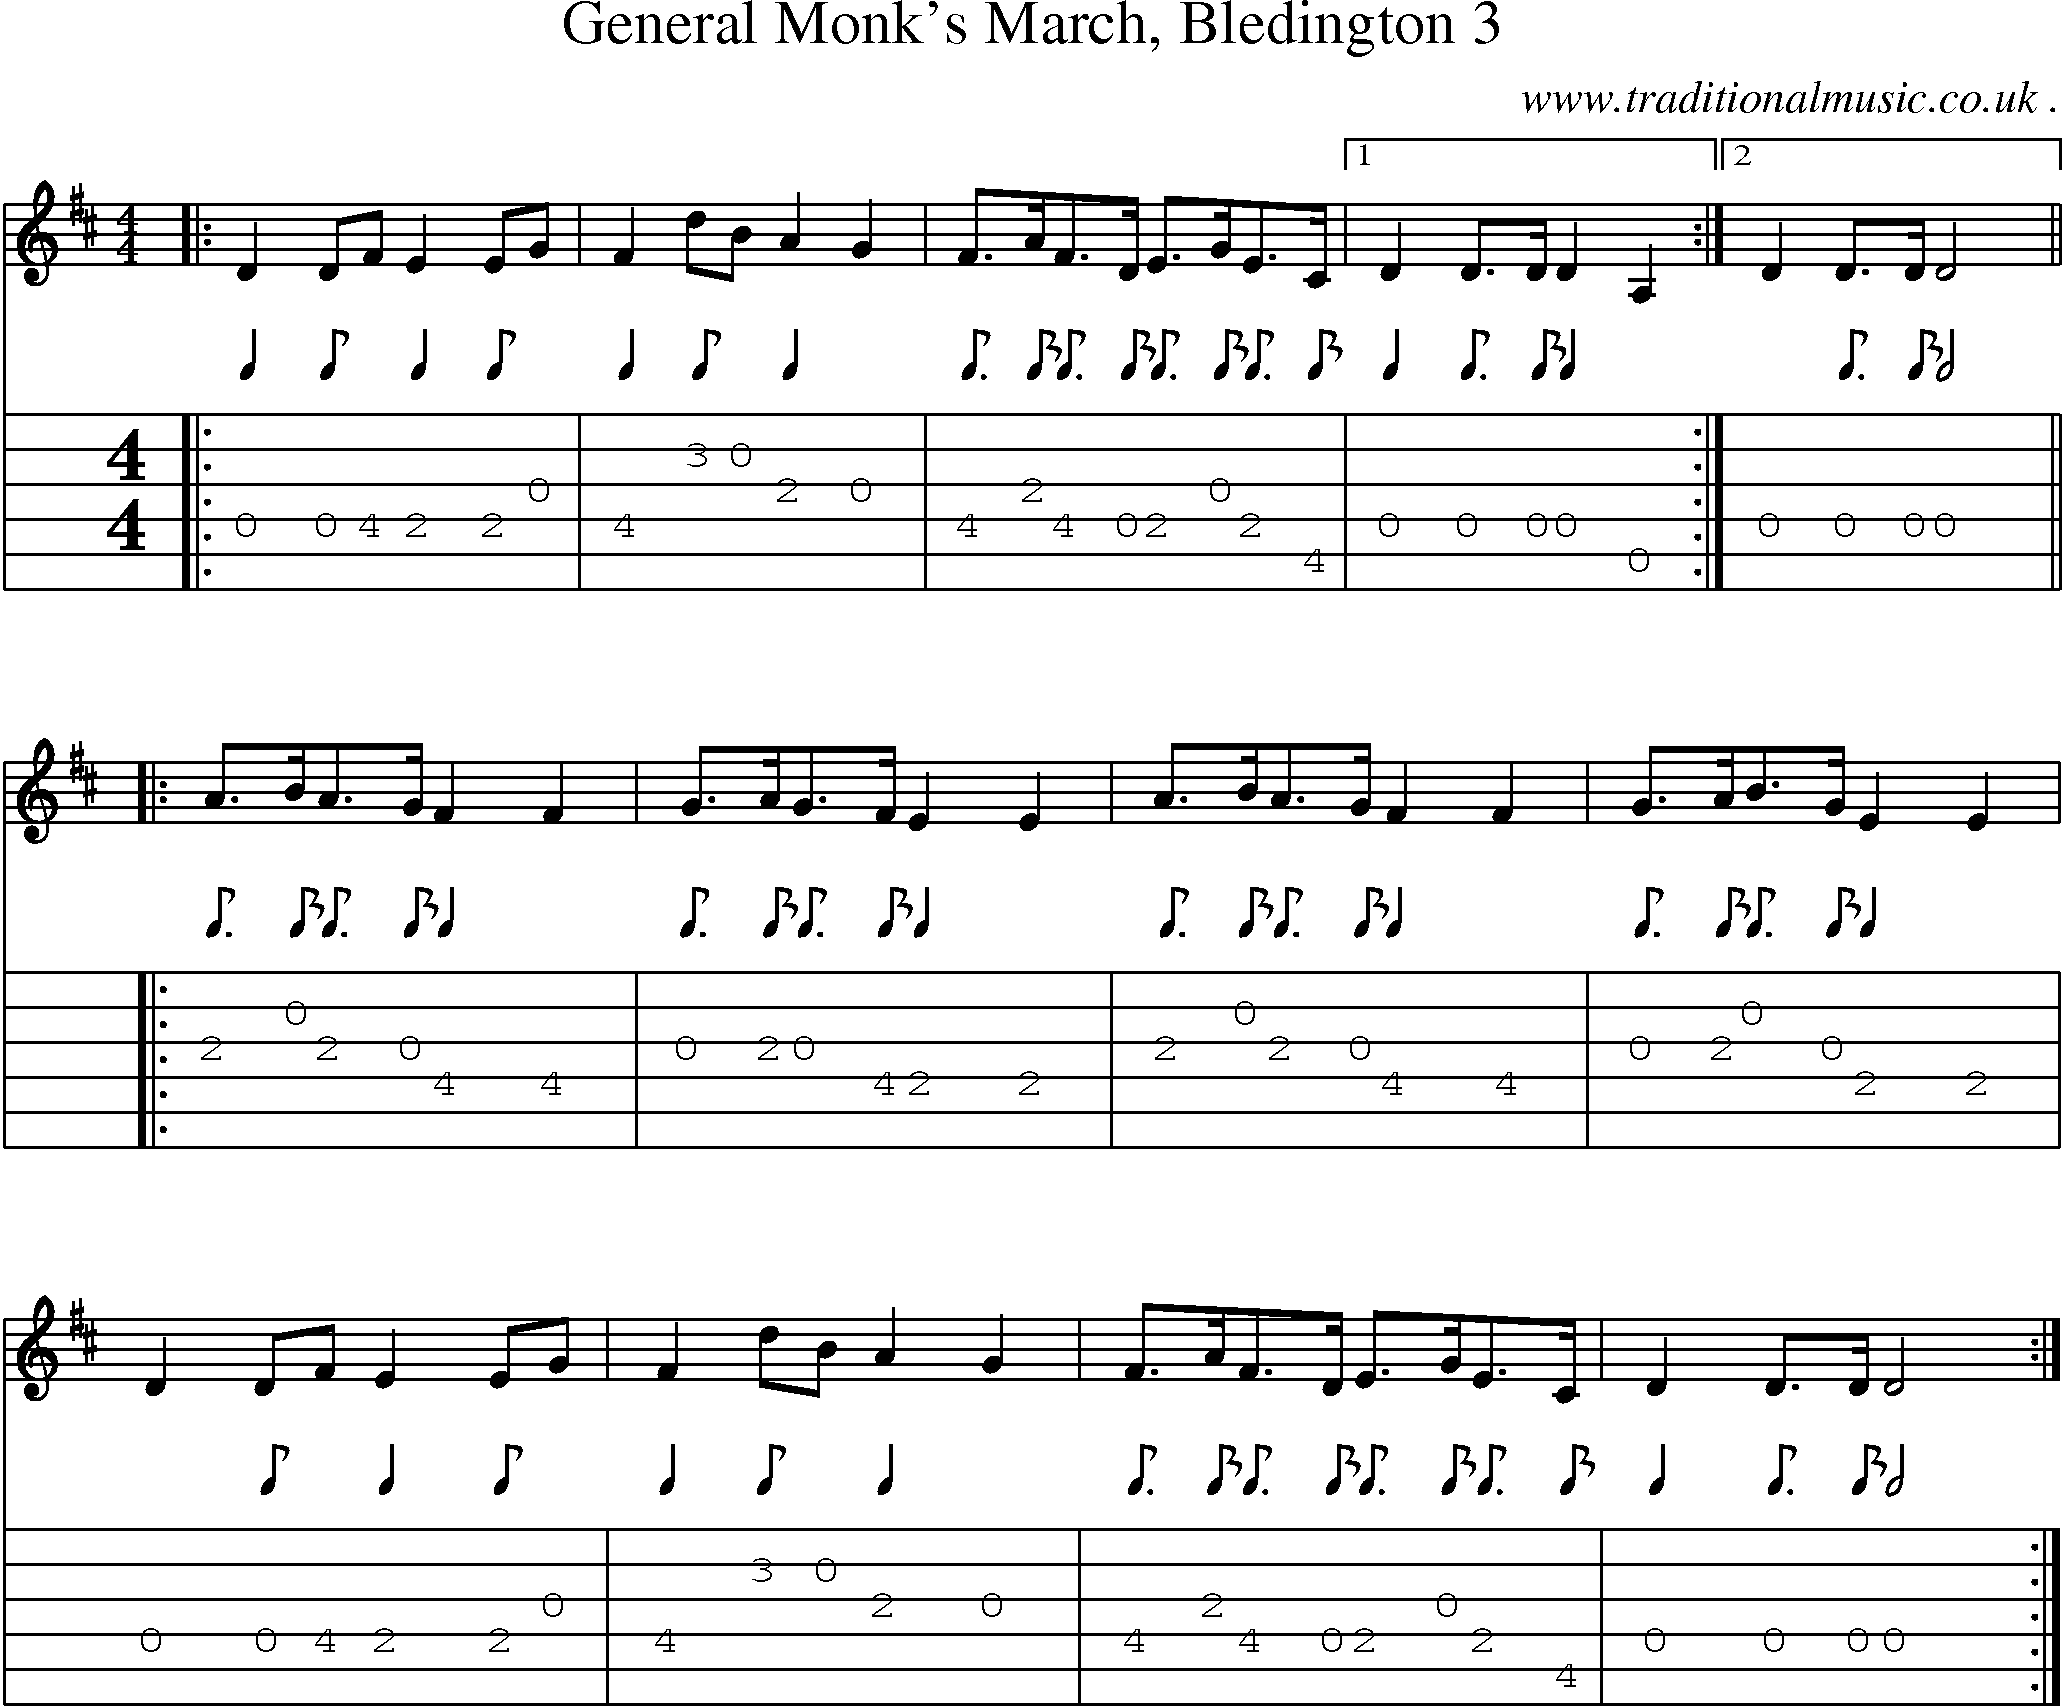 Sheet-Music and Guitar Tabs for General Monks March Bledington 3